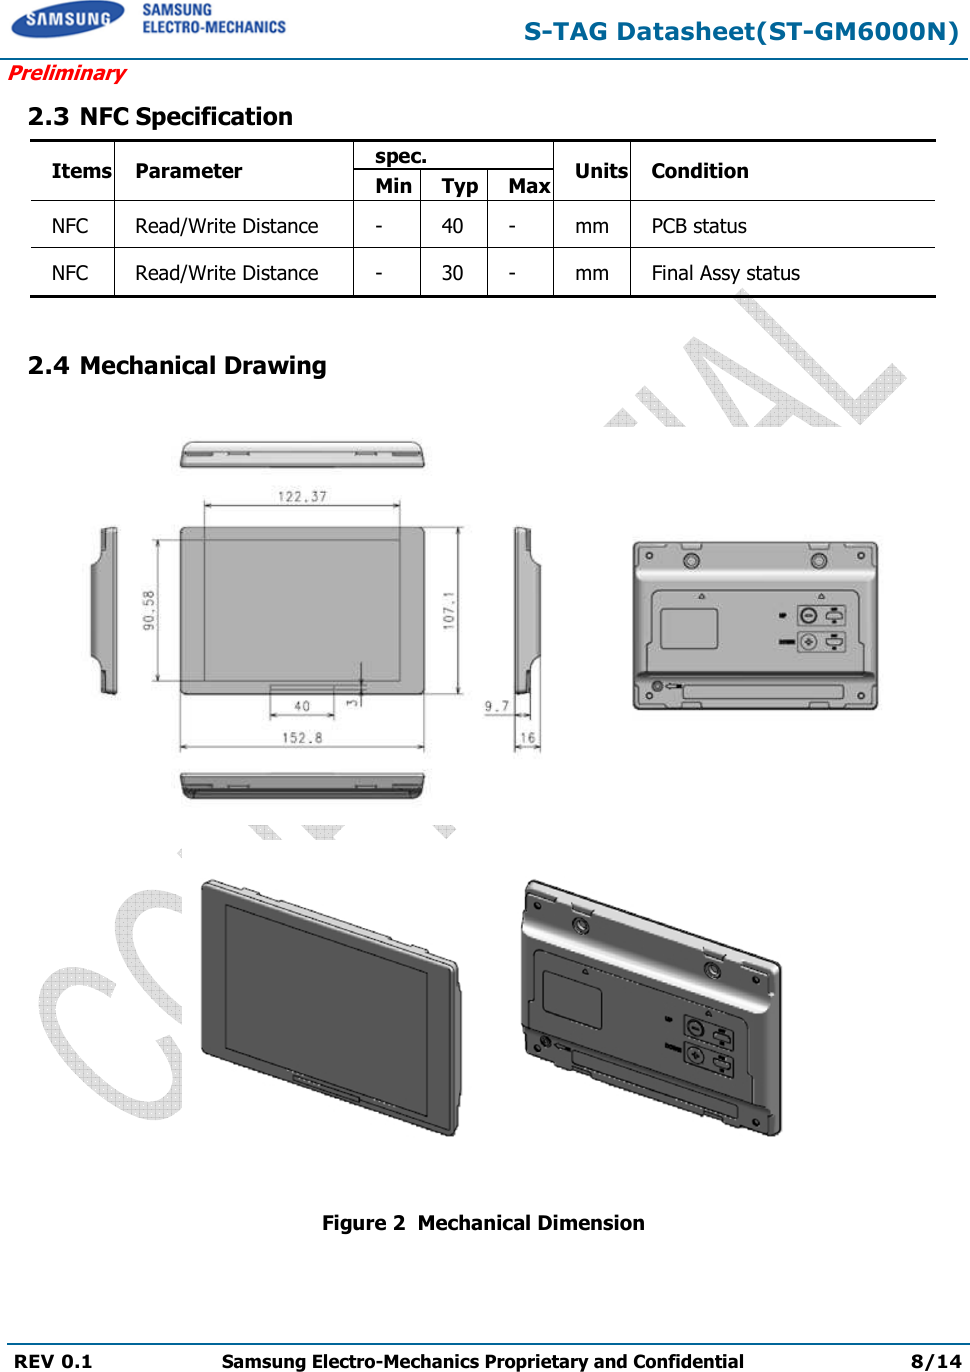  S-TAG Datasheet(ST-GM6000N) Preliminary REV 0.1  Samsung Electro-Mechanics Proprietary and Confidential 8/14   2.3 NFC Specification Items Parameter spec. Units Condition Min Typ Max NFC  Read/Write Distance  -  40  -  mm  PCB status NFC  Read/Write Distance  -  30  -  mm  Final Assy status  2.4 Mechanical Drawing     Figure 2  Mechanical Dimension   